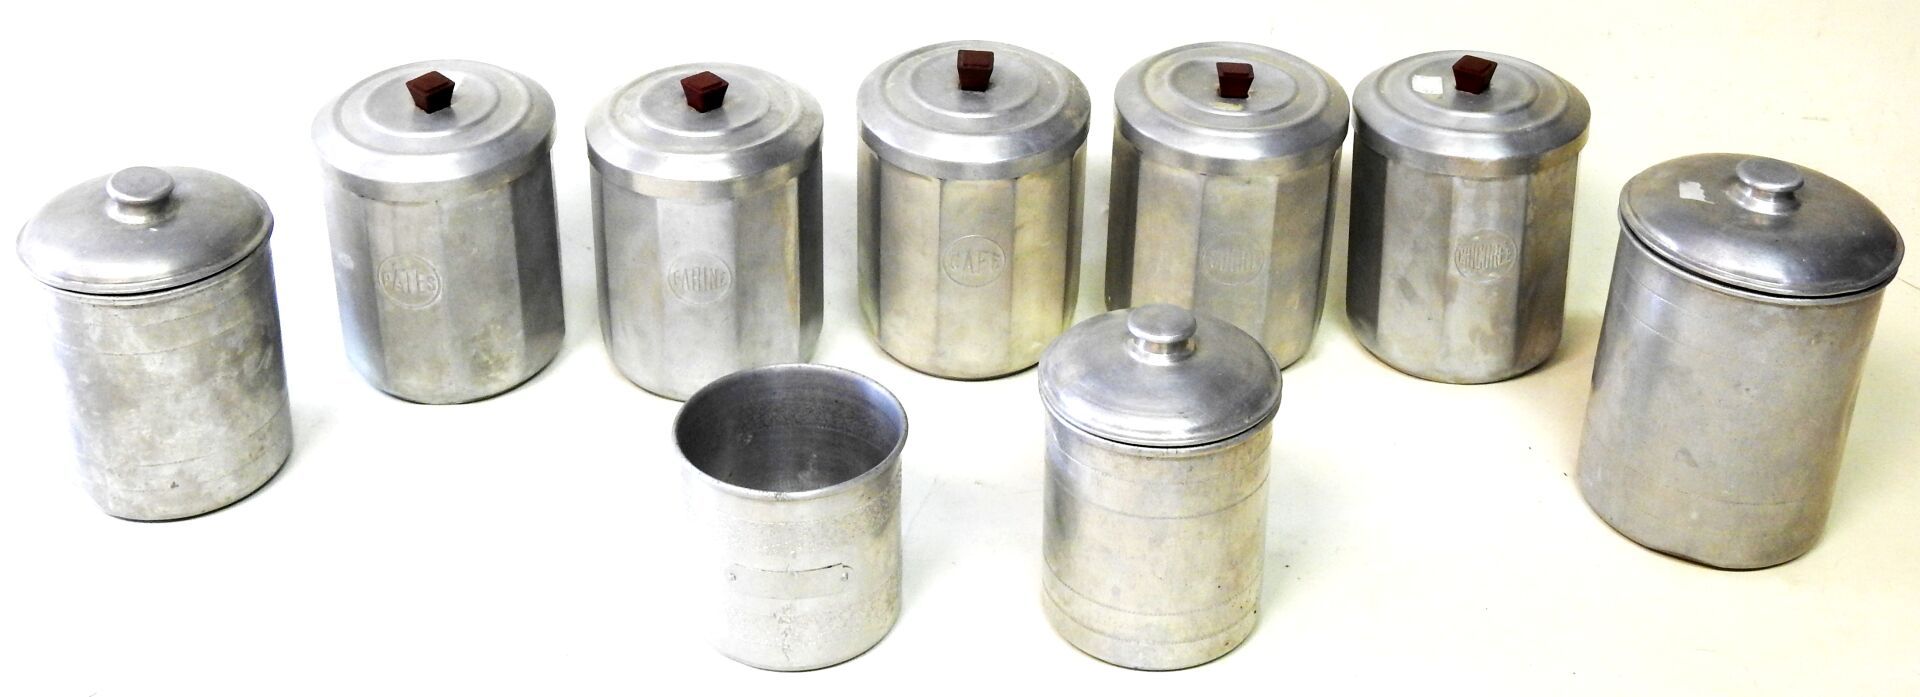 Null Meeting of nine covered and uncovered pewter pots of various sizes.

Wear, &hellip;